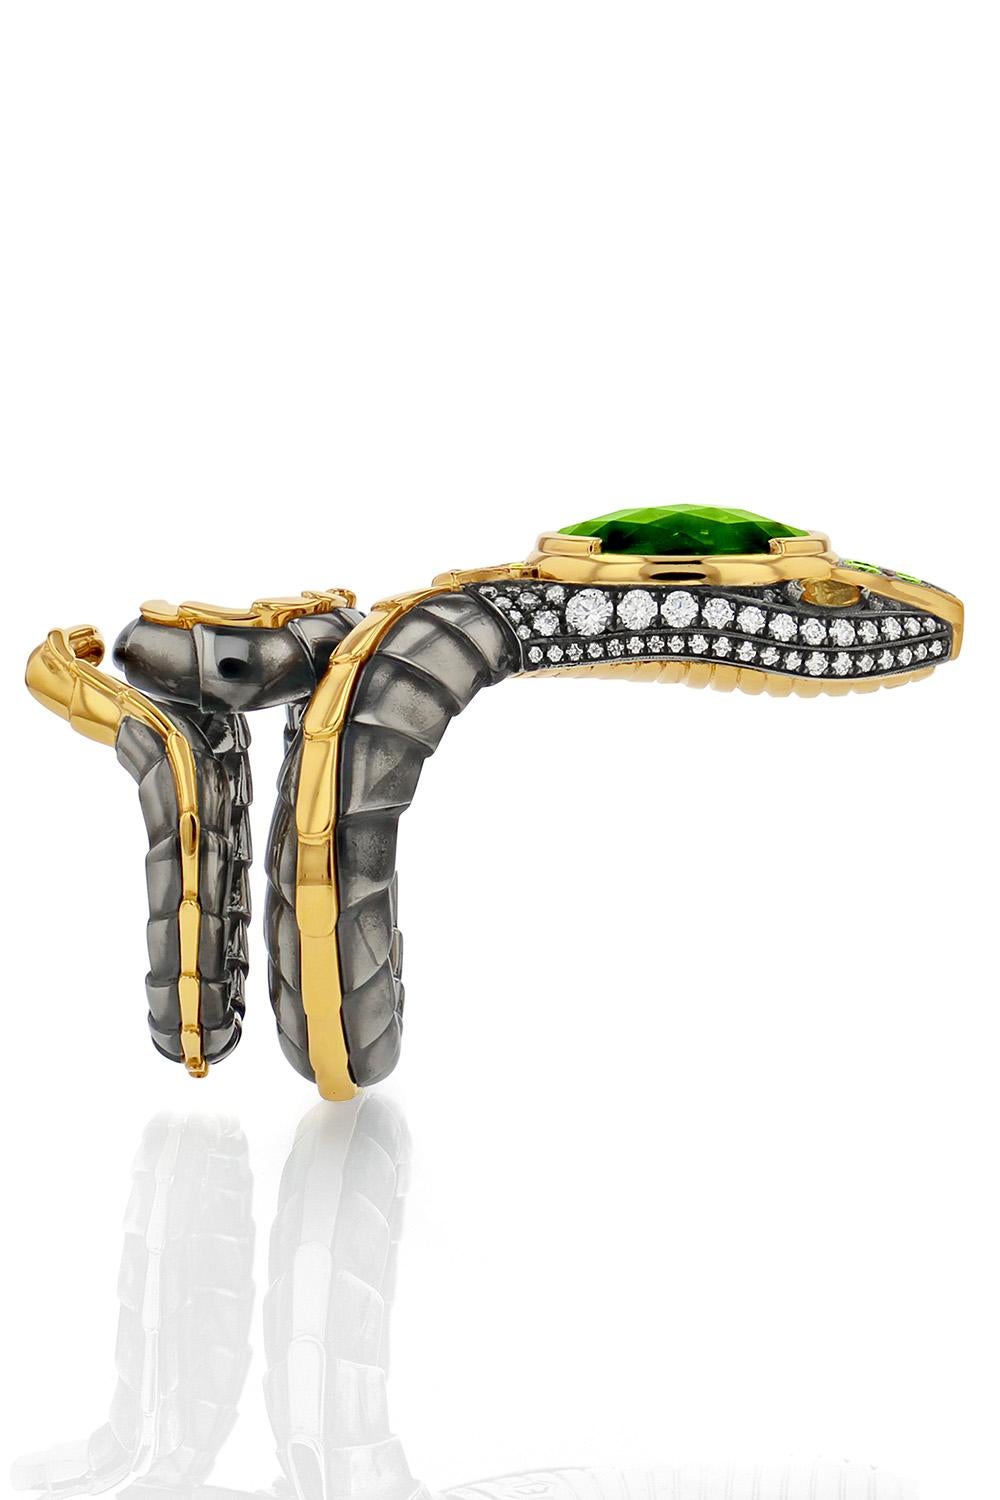 Neoclassical Peridot Briolette Serpent Ring in 18k Gold & Distressed Silver by Elie Top For Sale